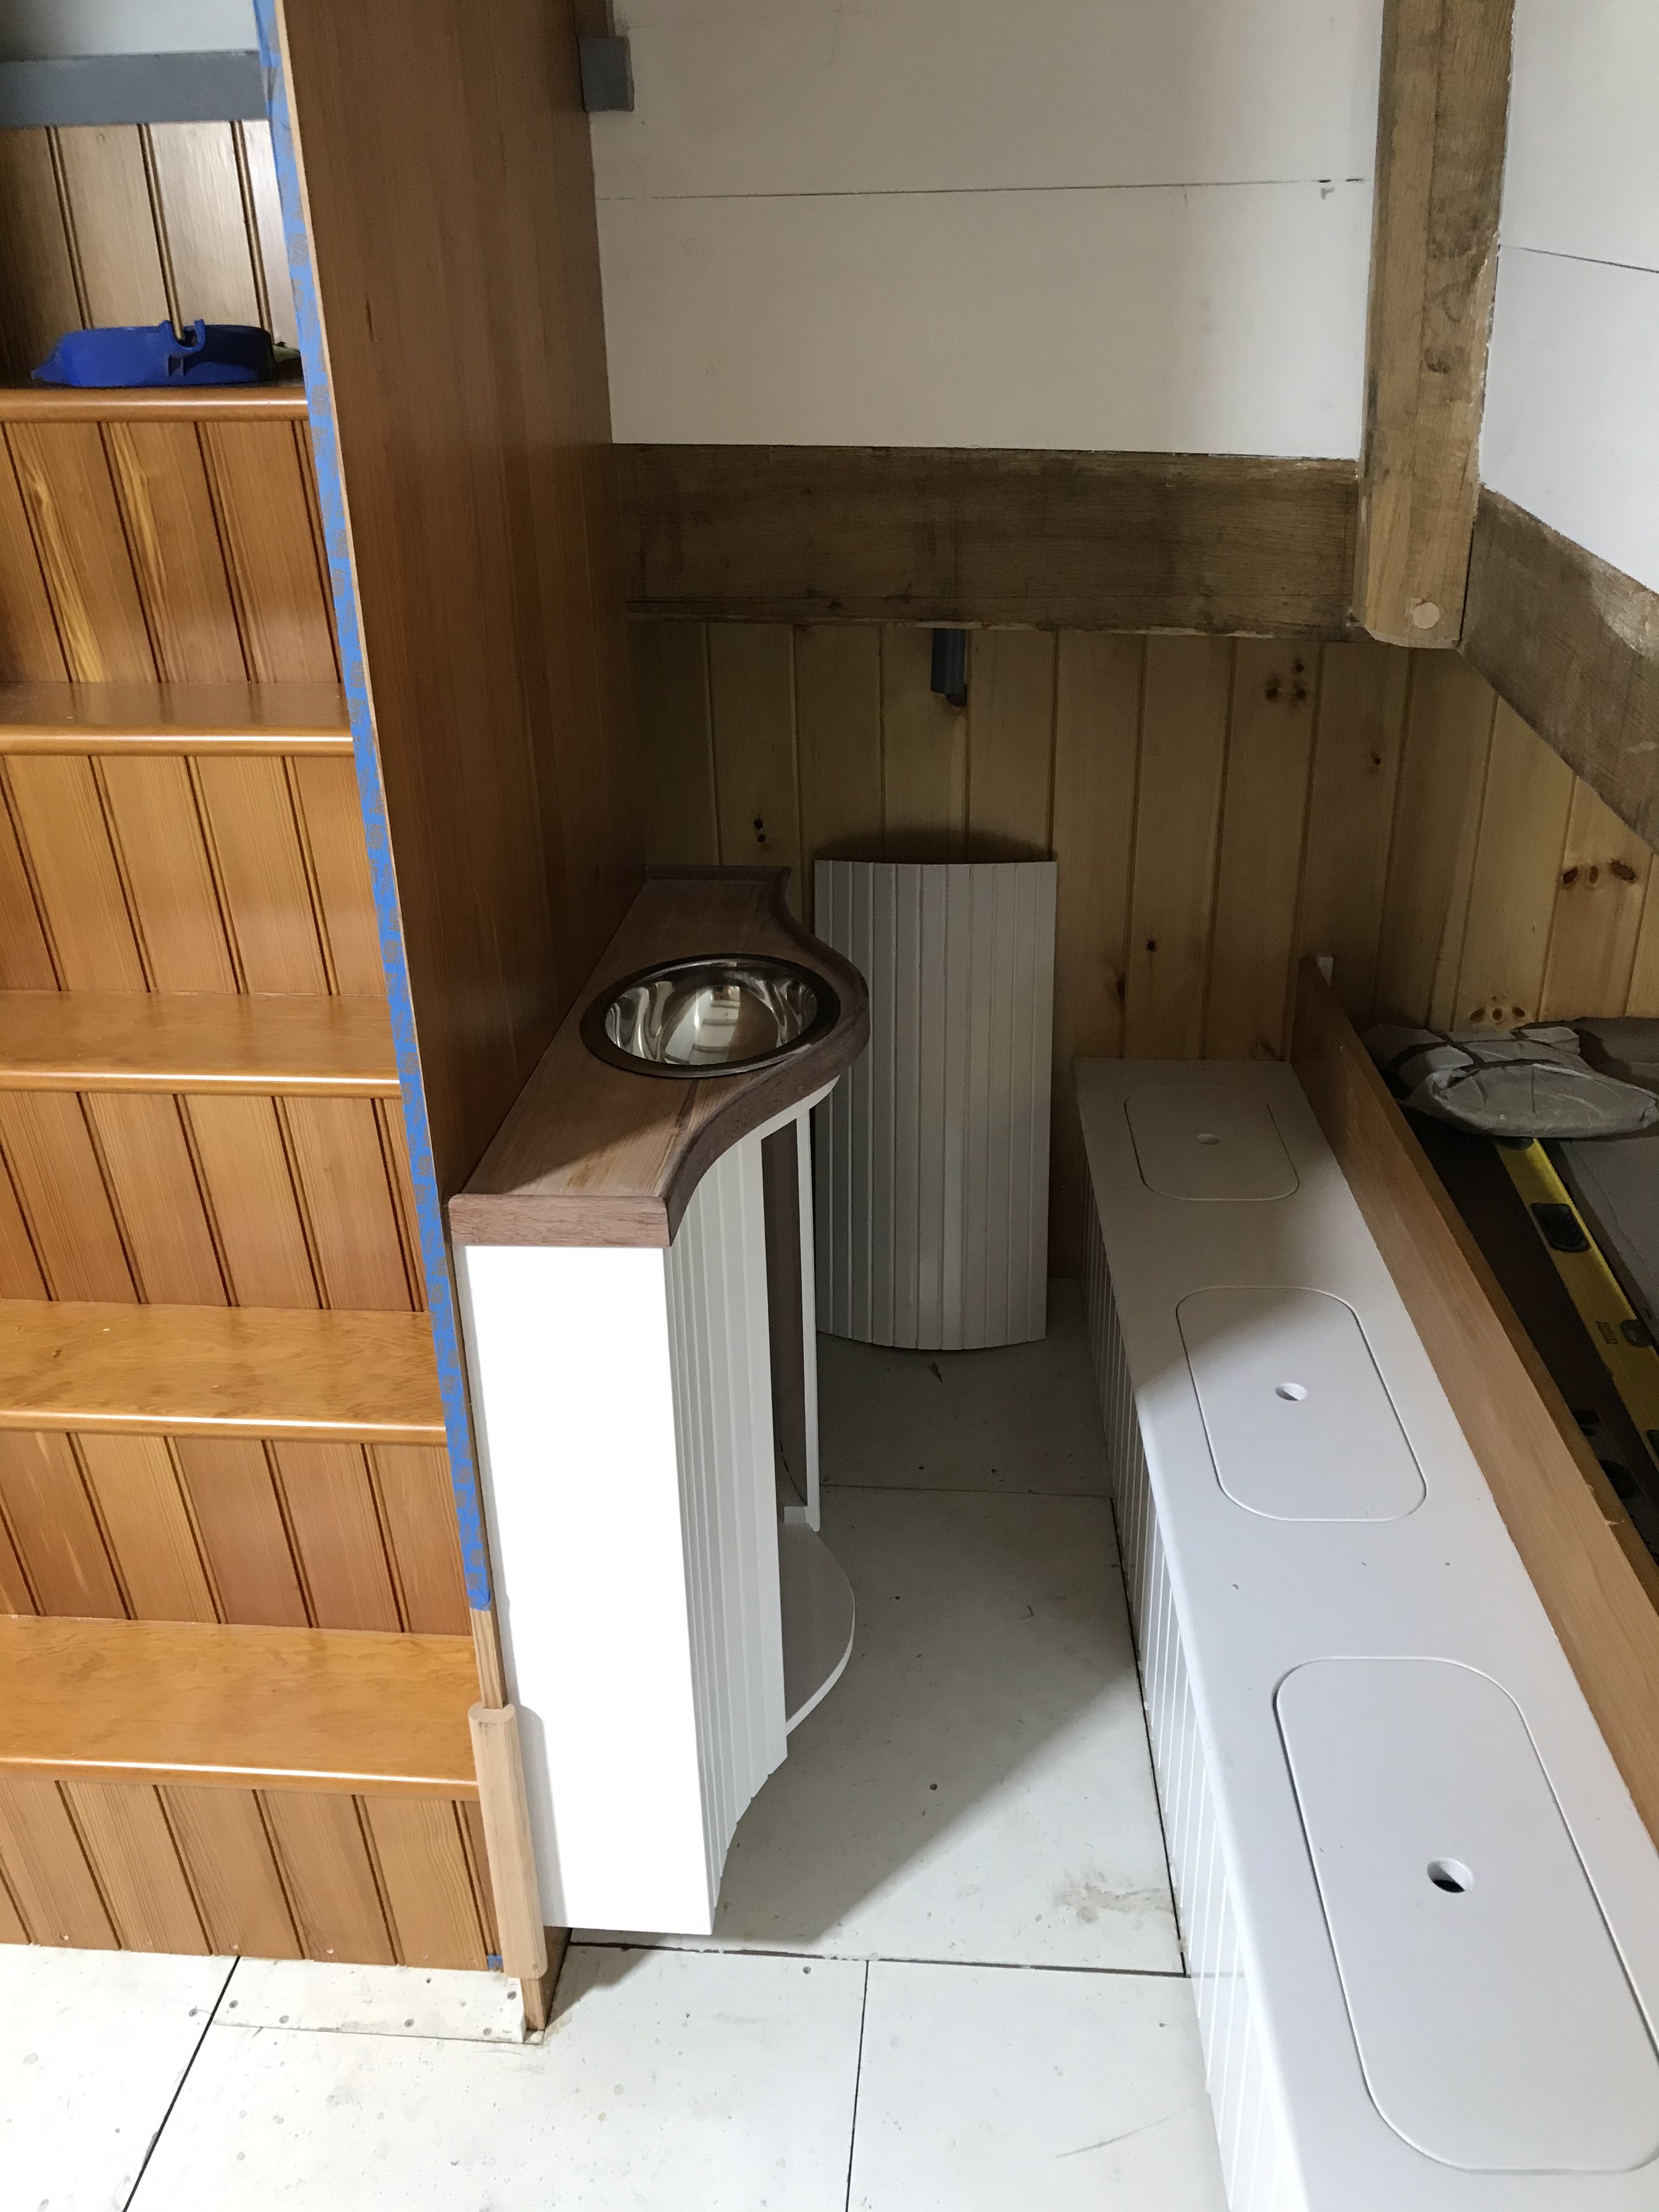 The Aft Cabin sink has been installed, and looks terrific!  The cupboard door will remain off until the plumbing is completed in the next couple of weeks.  Once everything is hooked up, a final coat of varnish will be applied before the entire unit is wrapped in protective coverings until sea trials next summer!